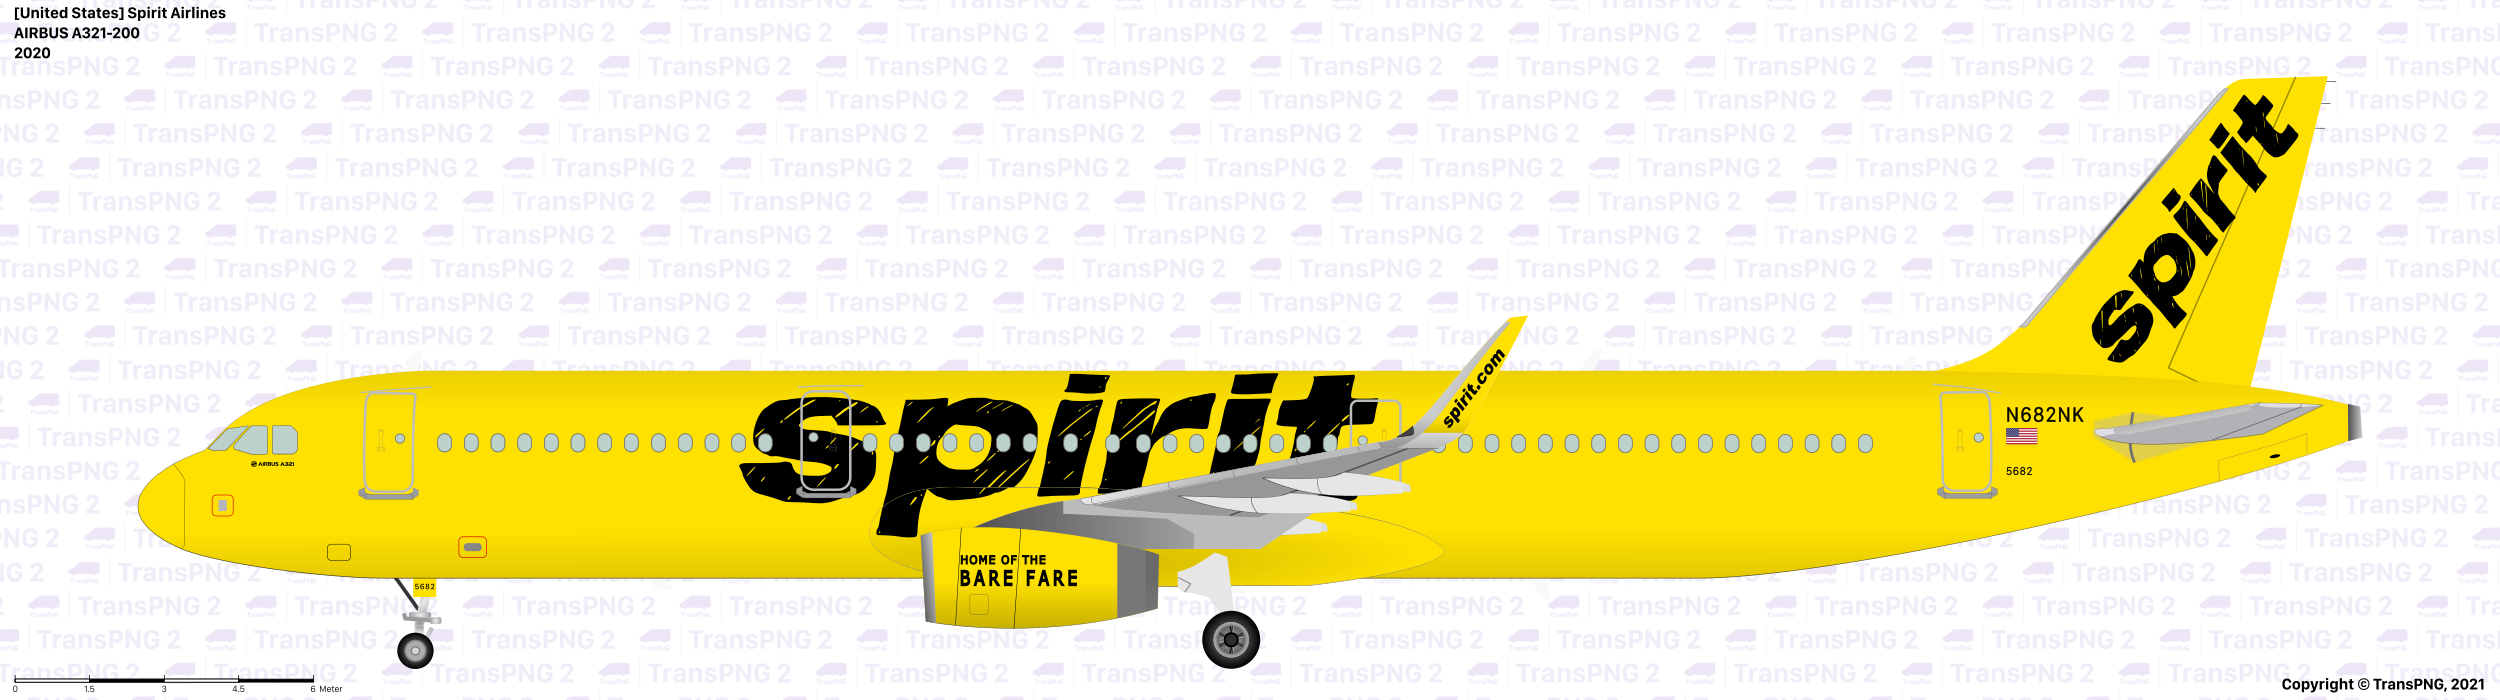 [25119] Spirit Airlines 51108134169_8f04539721_o